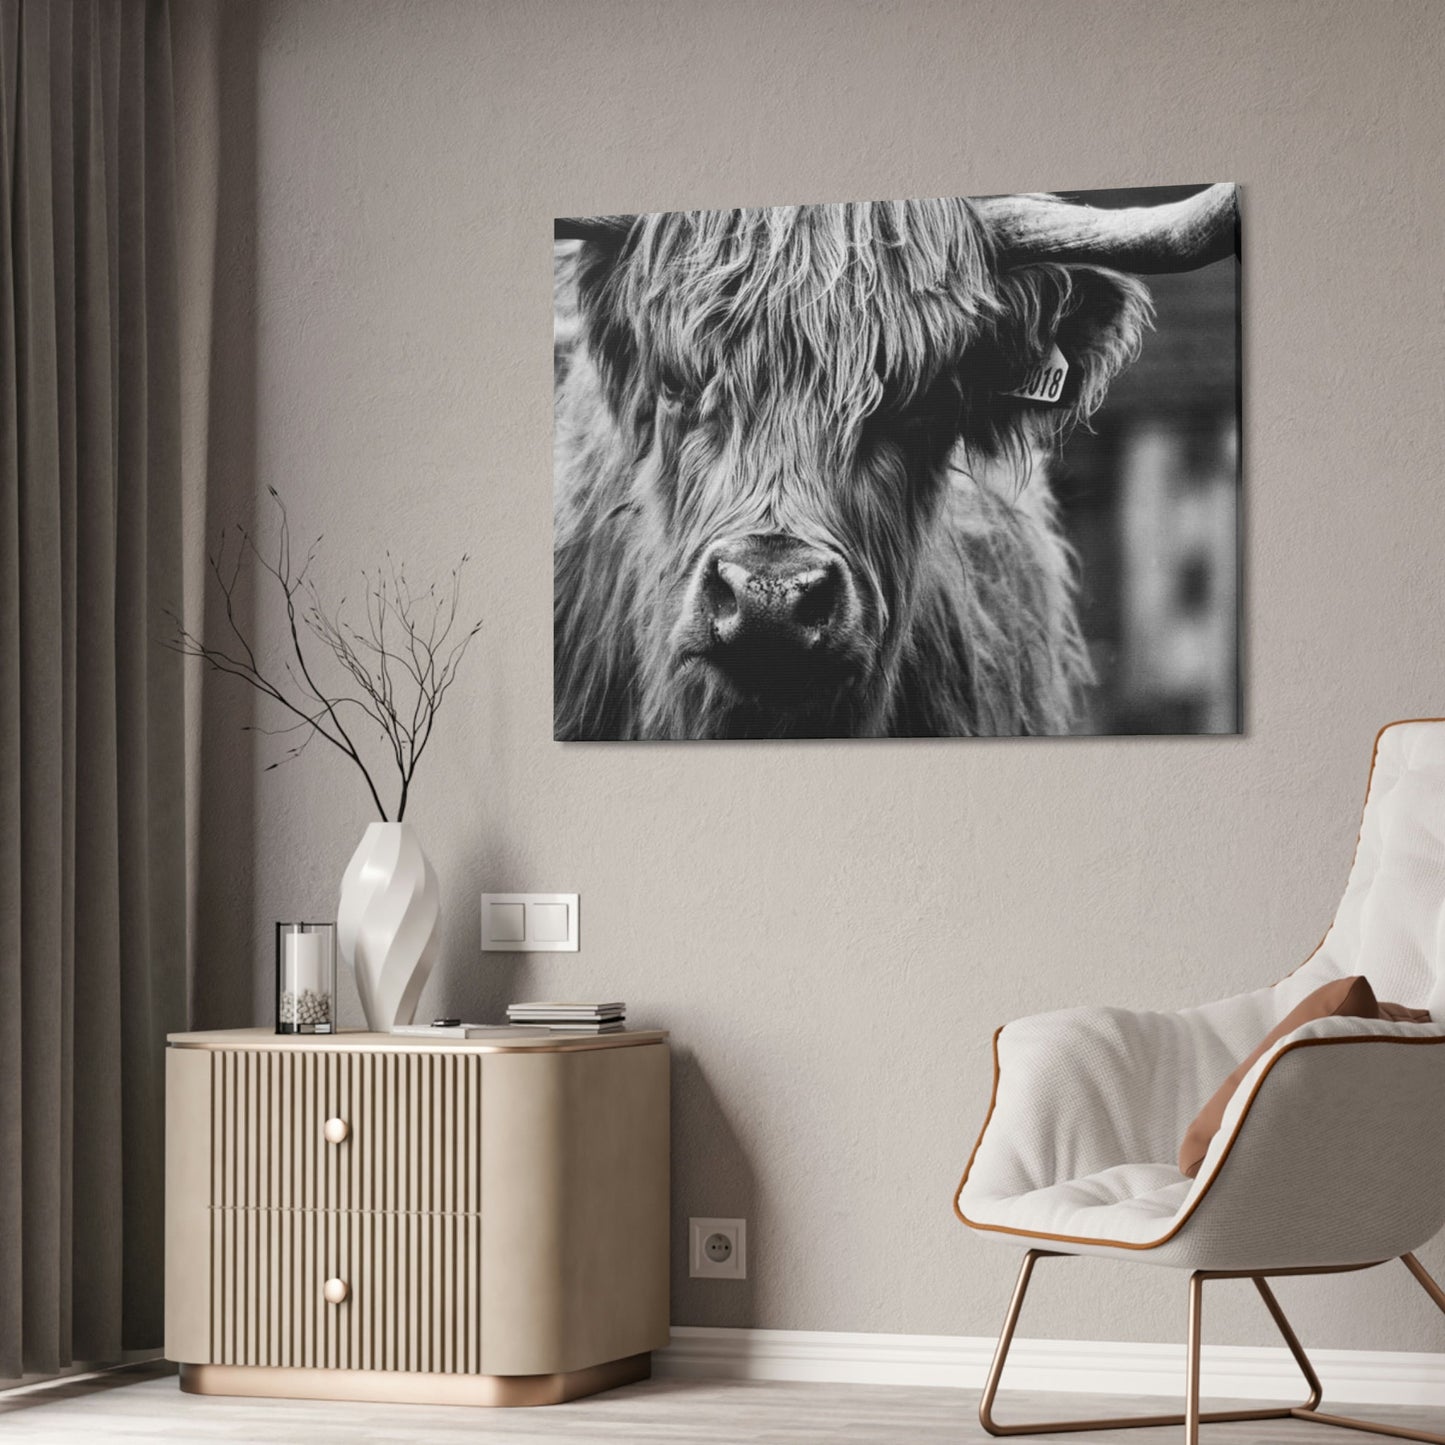 Rustic Highland Cow: Vintage Wall Art